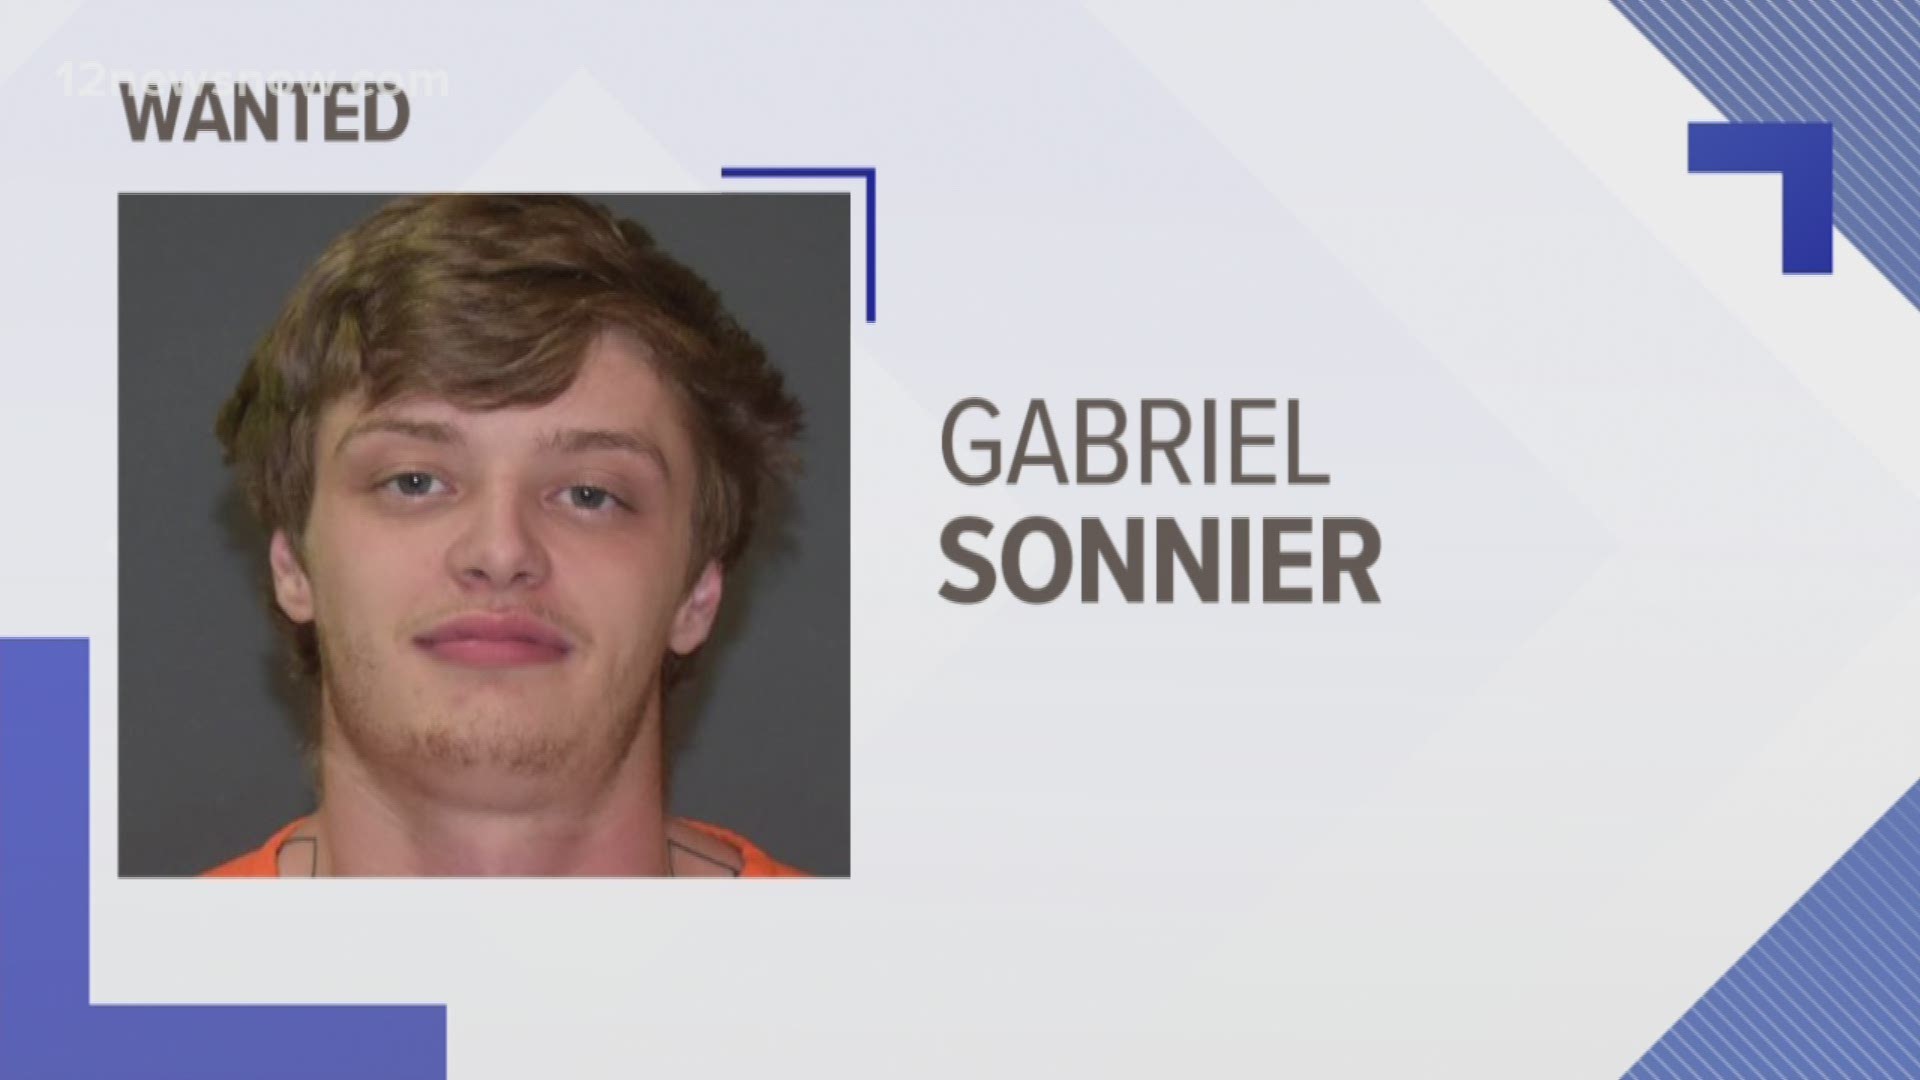 Law enforcement is looking for Gabriel Sonnier, who may have fled from Louisiana.